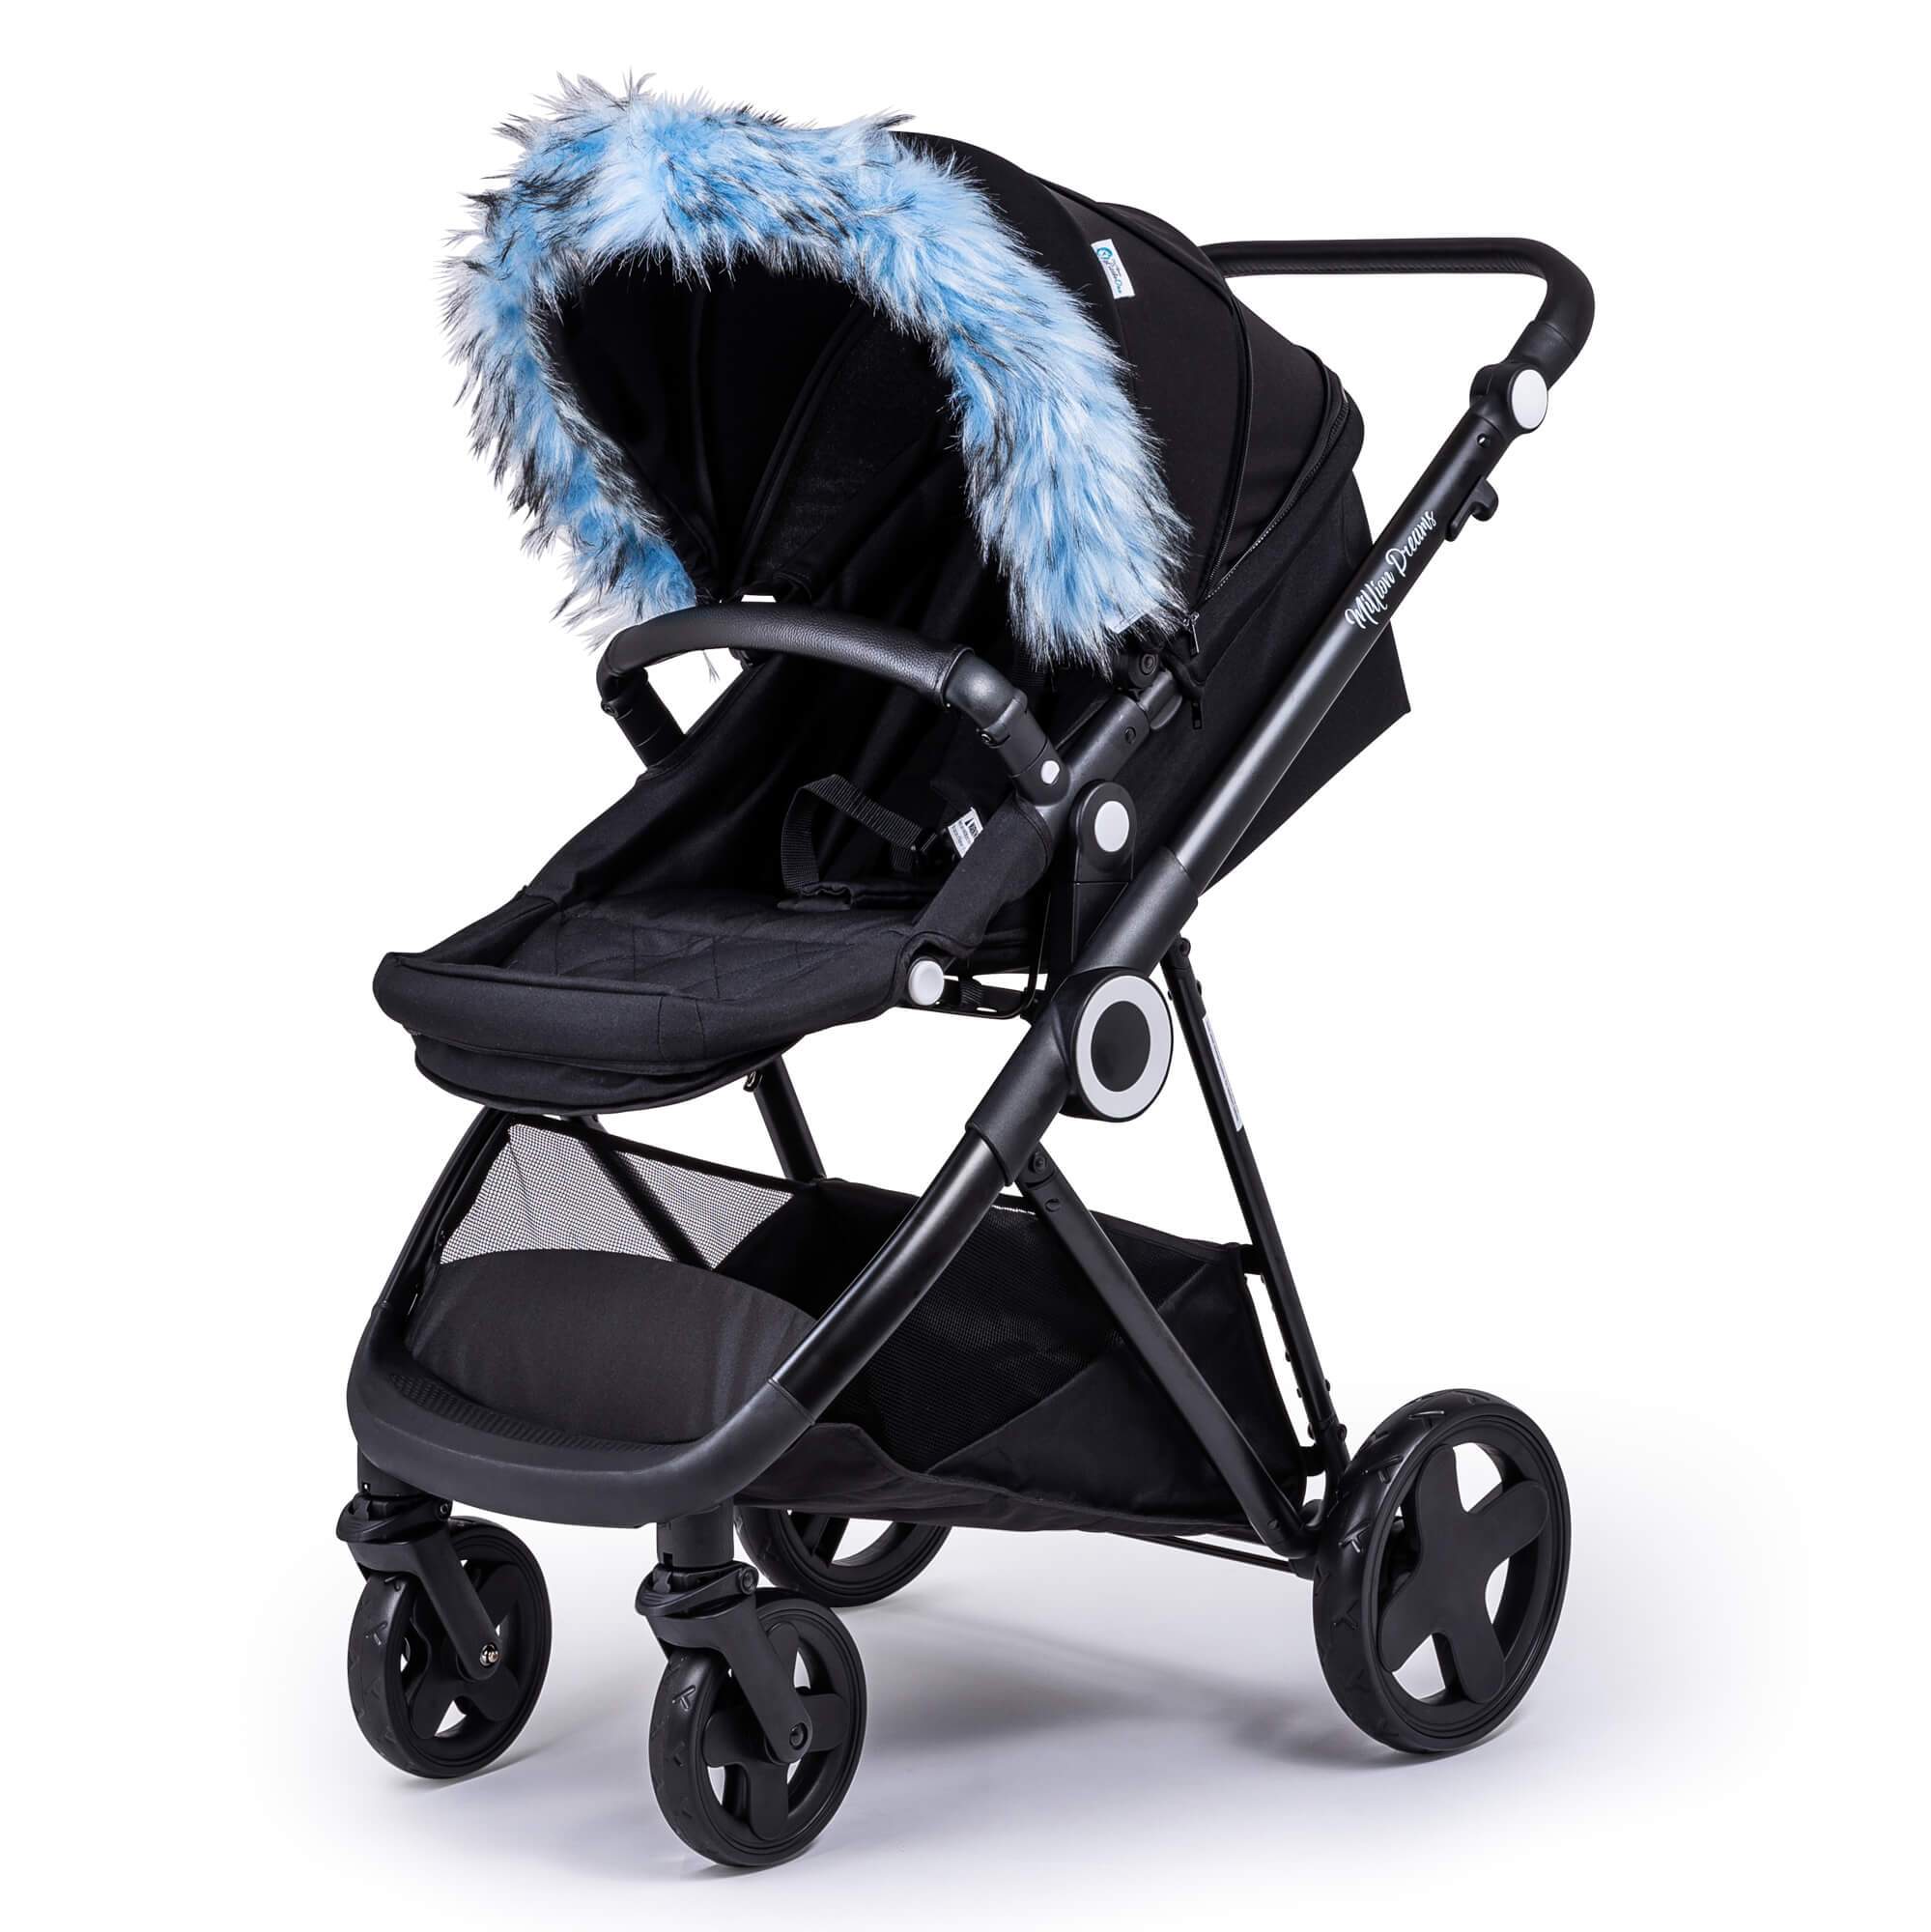 Pram Fur Hood Trim Attachment For Pushchair Compatible with Gb - Light Blue / Fits All Models | For Your Little One